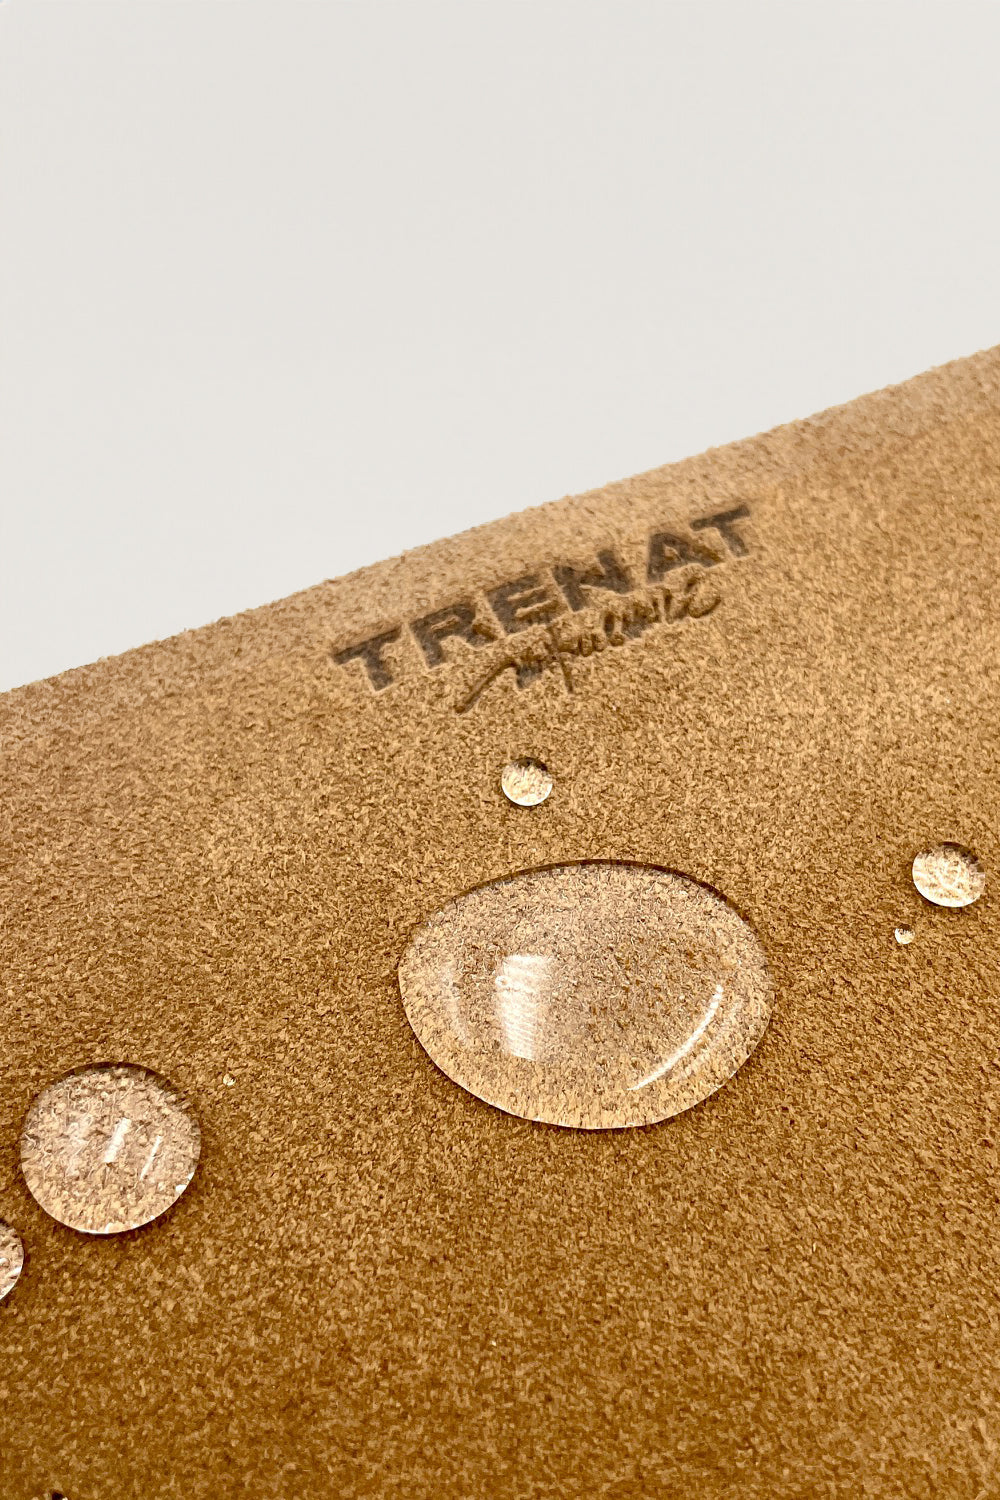 Leather Protector Trolley Tray "Cerca"